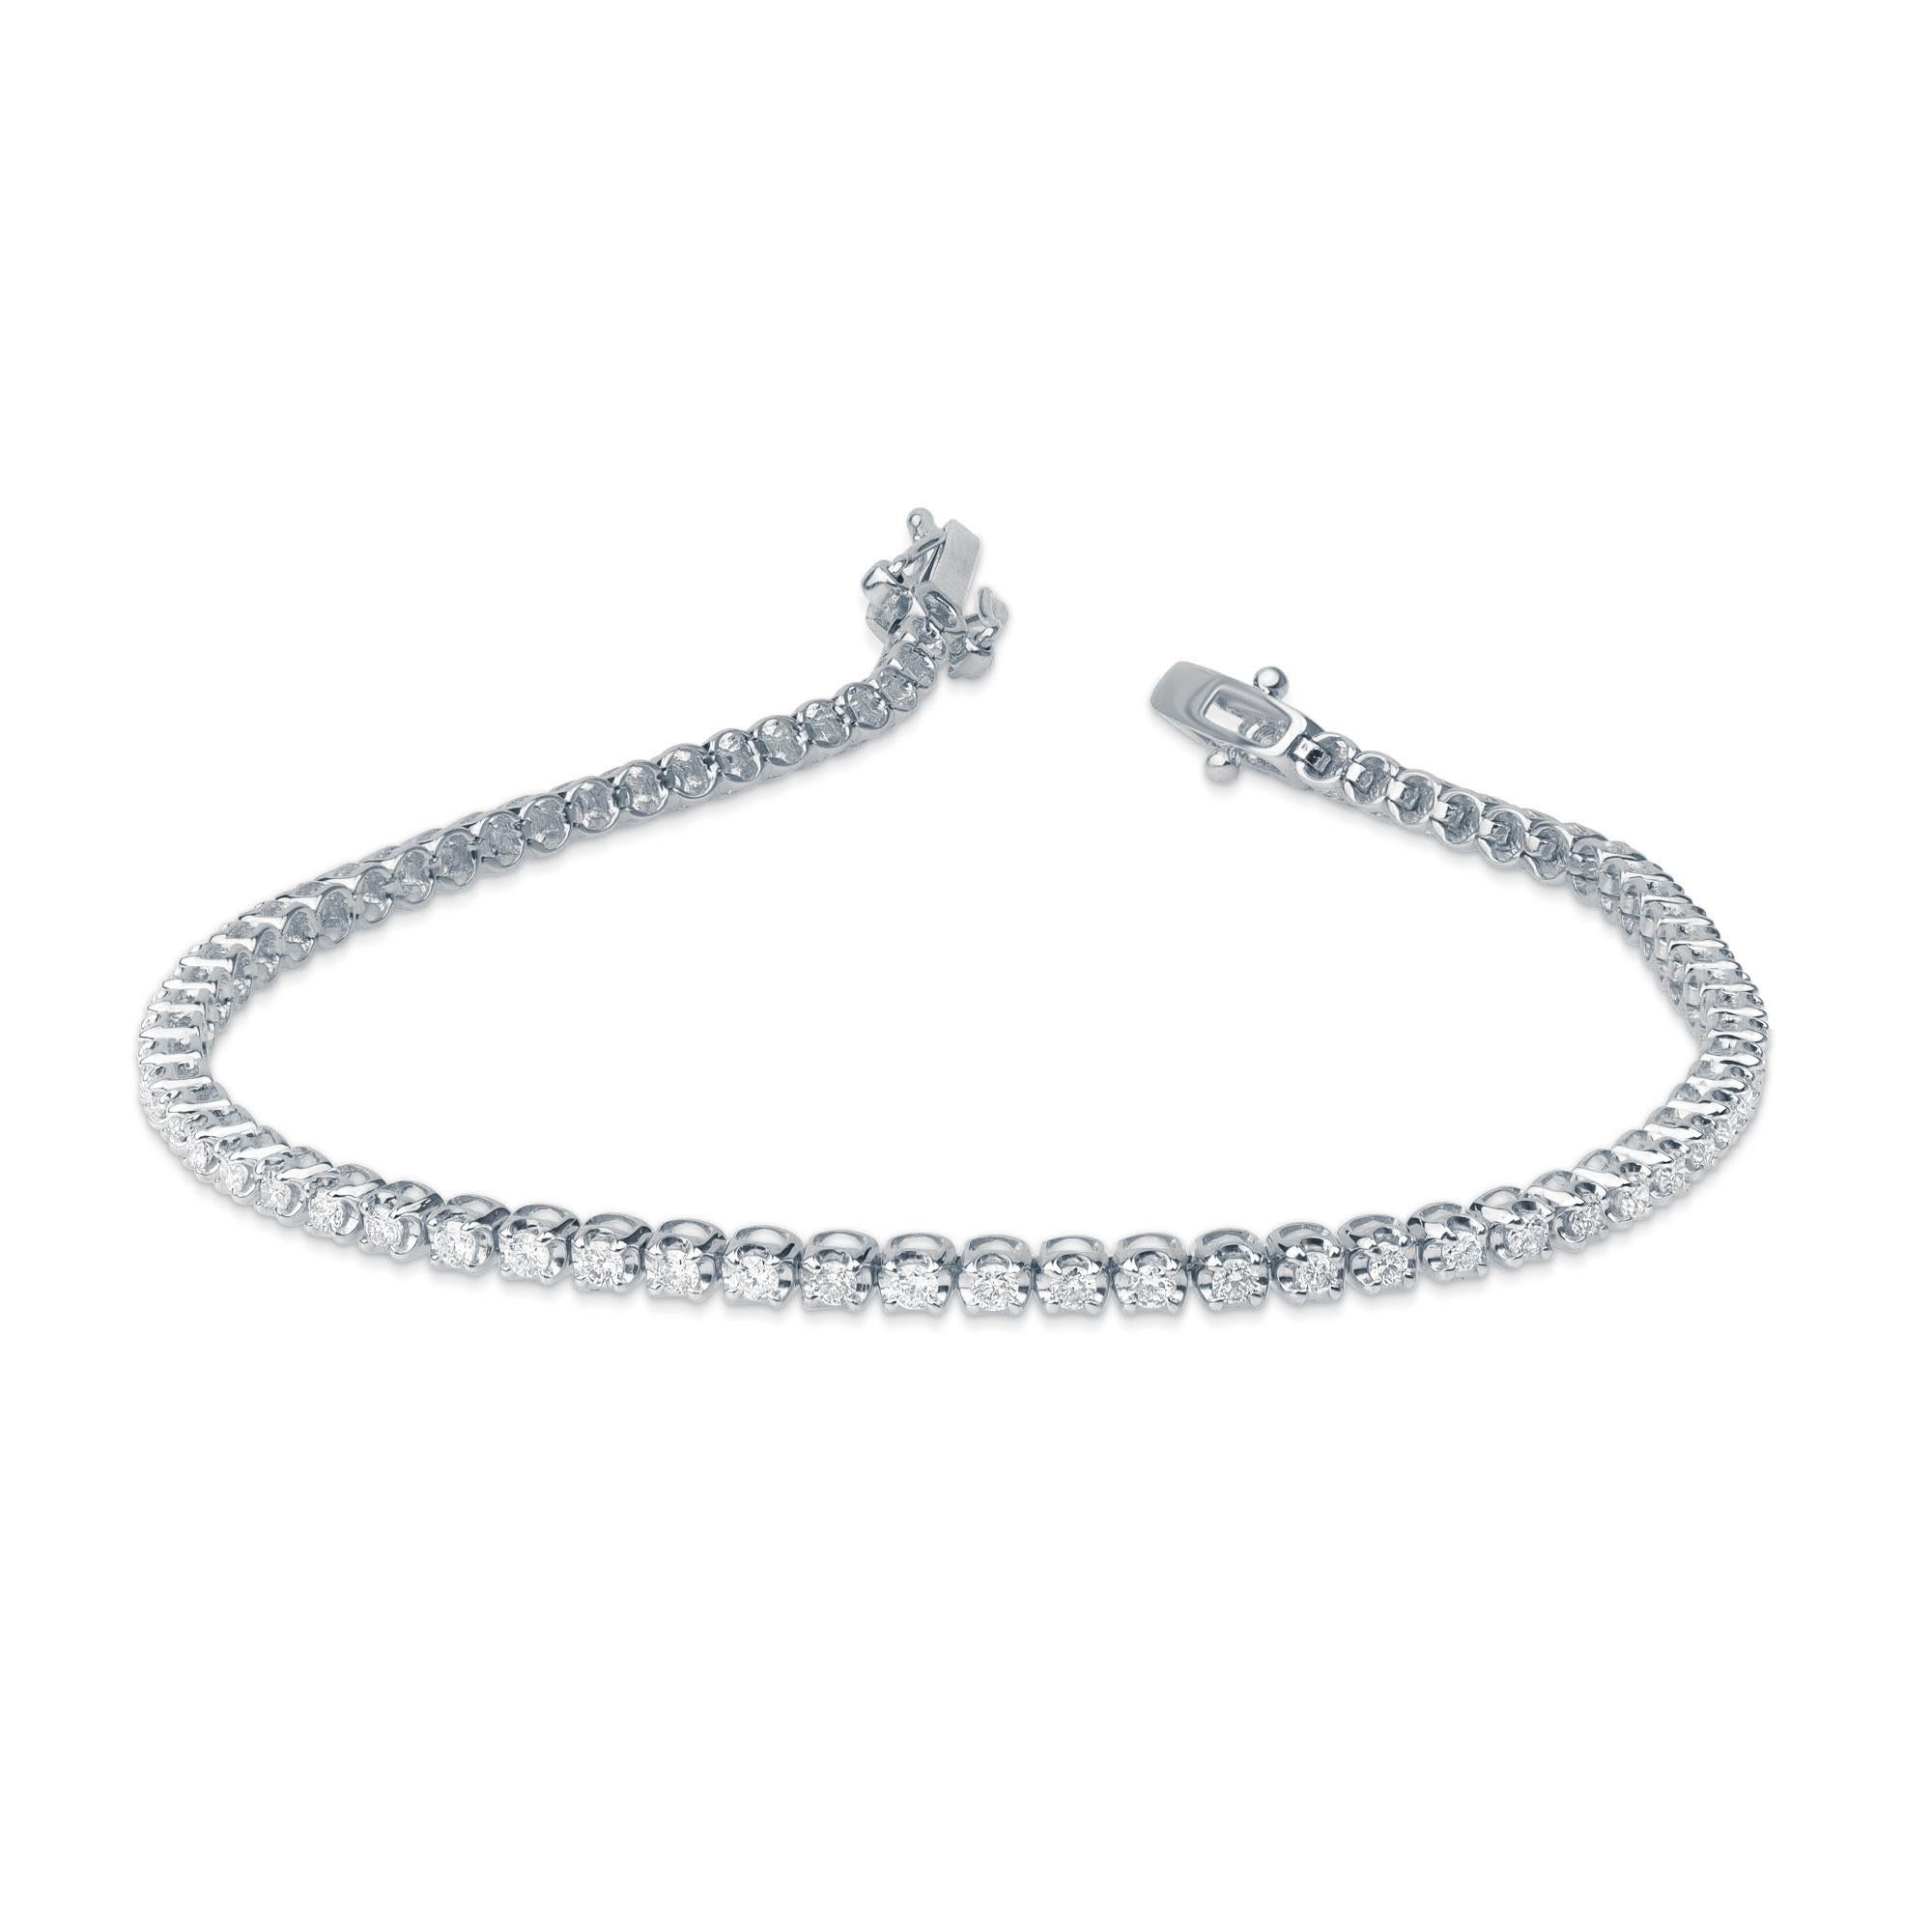 A classic tennis bracelet – perfect accessory for women with everyday attire. Elegantly designed in 10 kt white gold and embellished with 61 brilliant natural diamonds in prong setting. Diamonds are graded H-I Color, I2 Clarity. 
